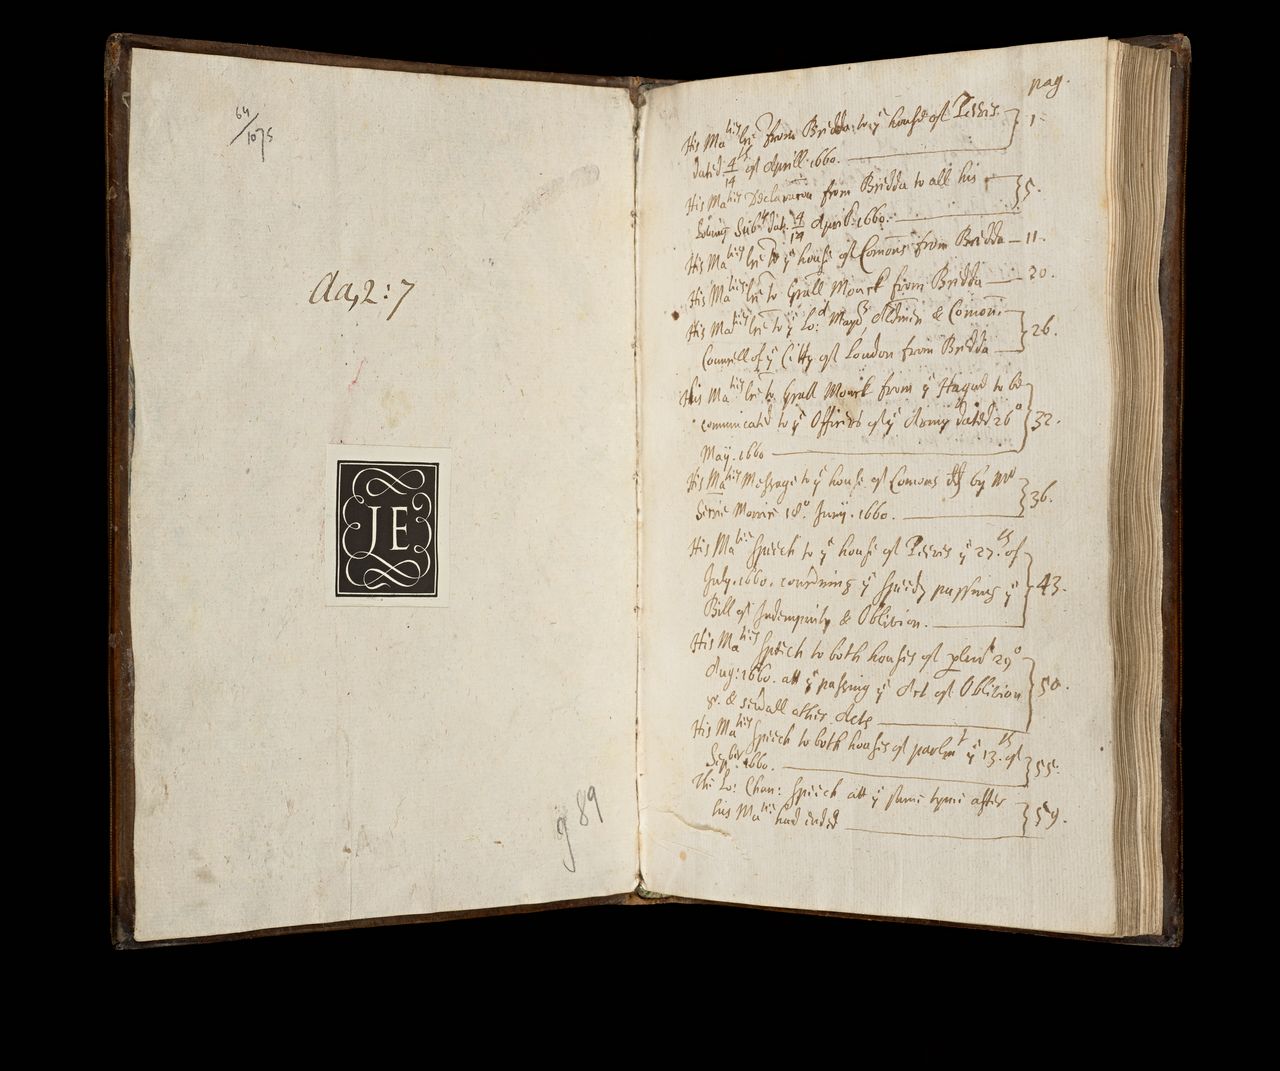 <em>A collection of His Majestie's gracious letters, speeches, messages, and declarations since April 4./14. 1660.</em>, London, printed by John Bill, printer to the Kings most excellent Majesty, at the King's Printing-House in Black-Friers, 1660,, State Library Victoria, Melbourne (RAREEMM 135/14)